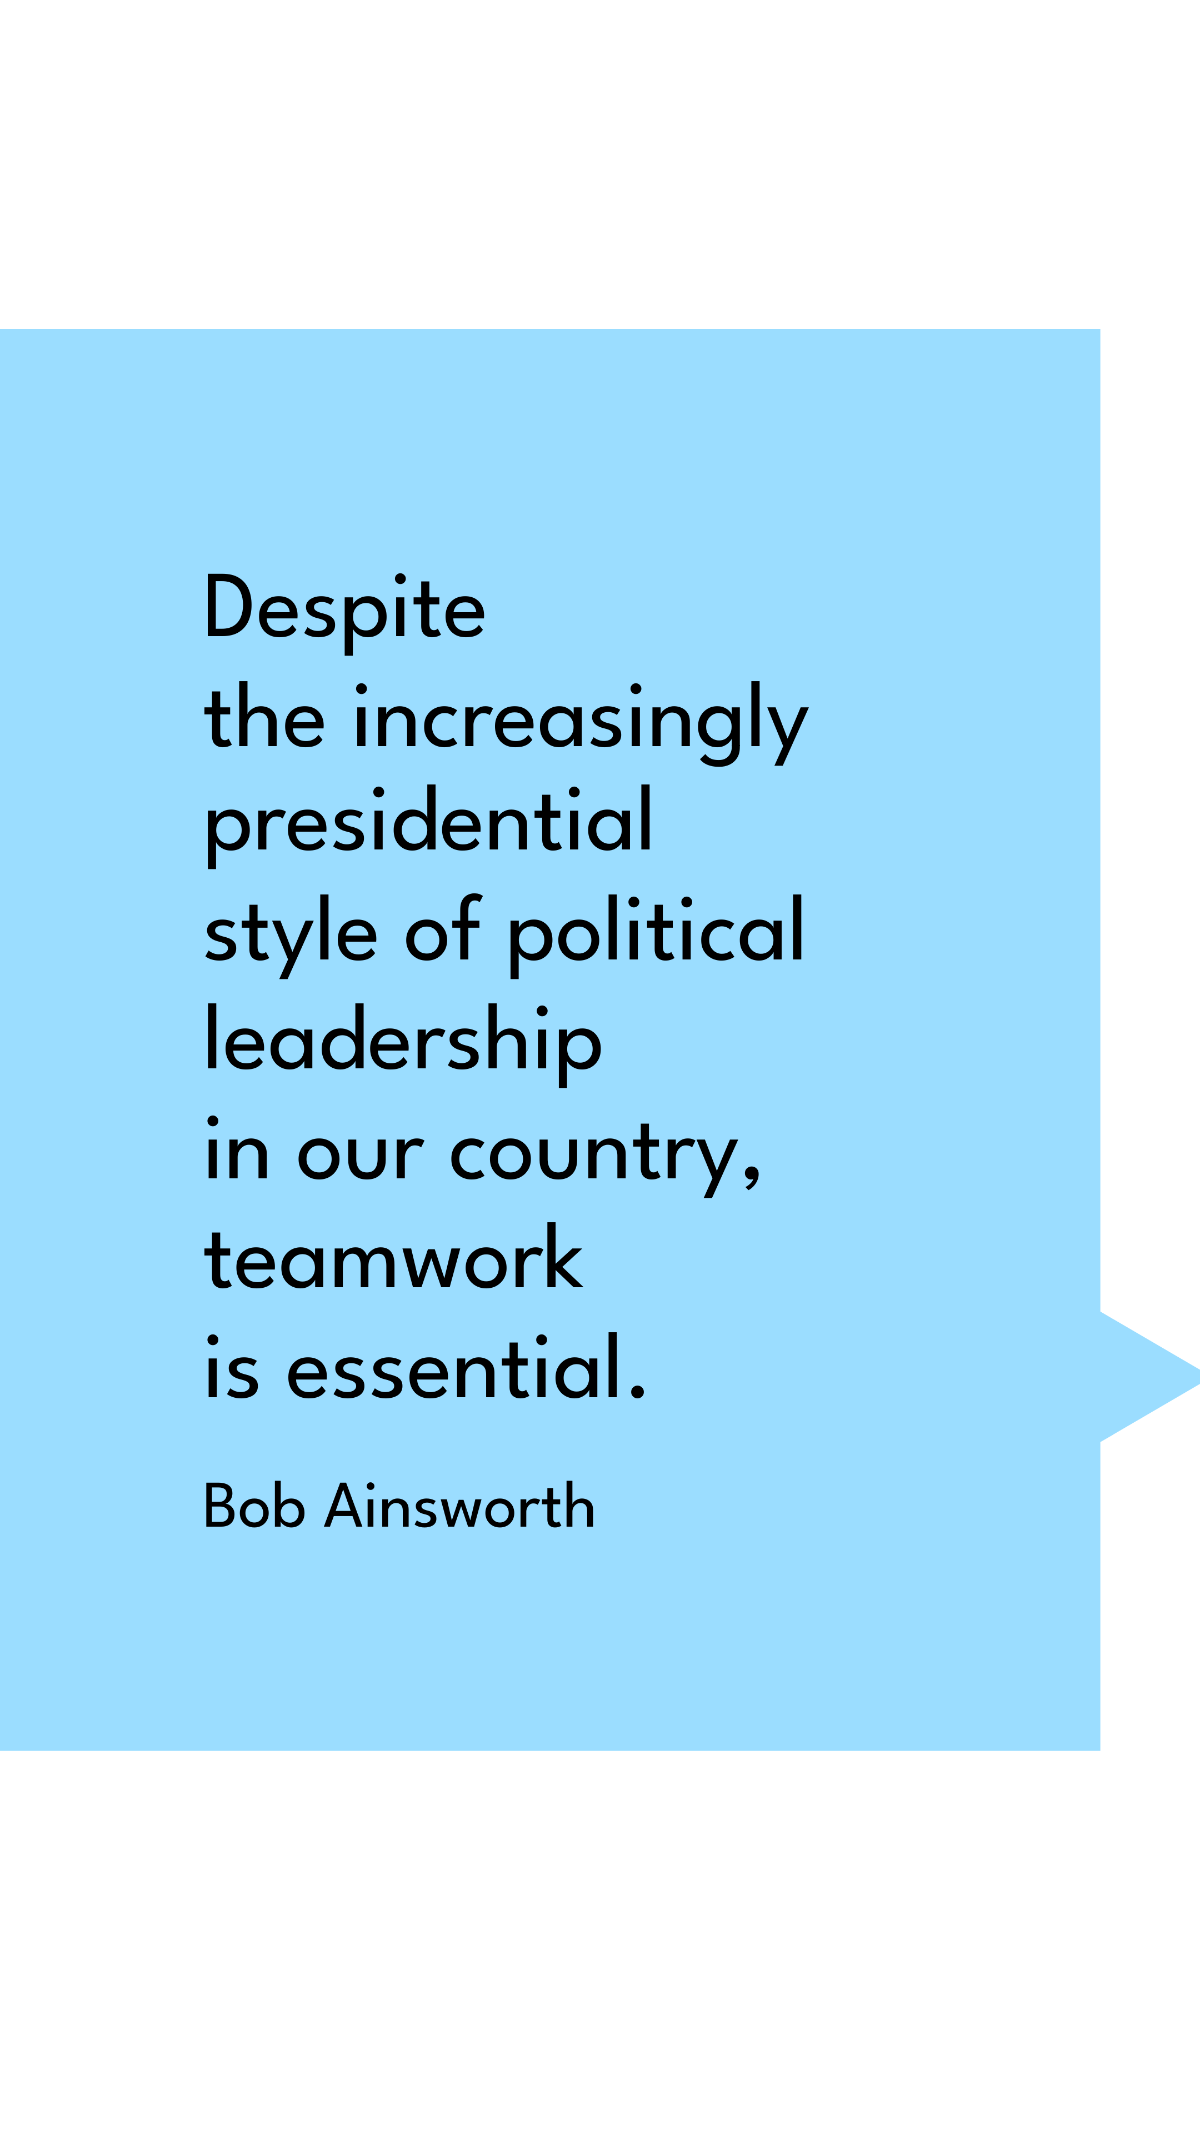 Free Bob Ainsworth - Despite the increasingly presidential style of political leadership in our country, teamwork is essential. Template